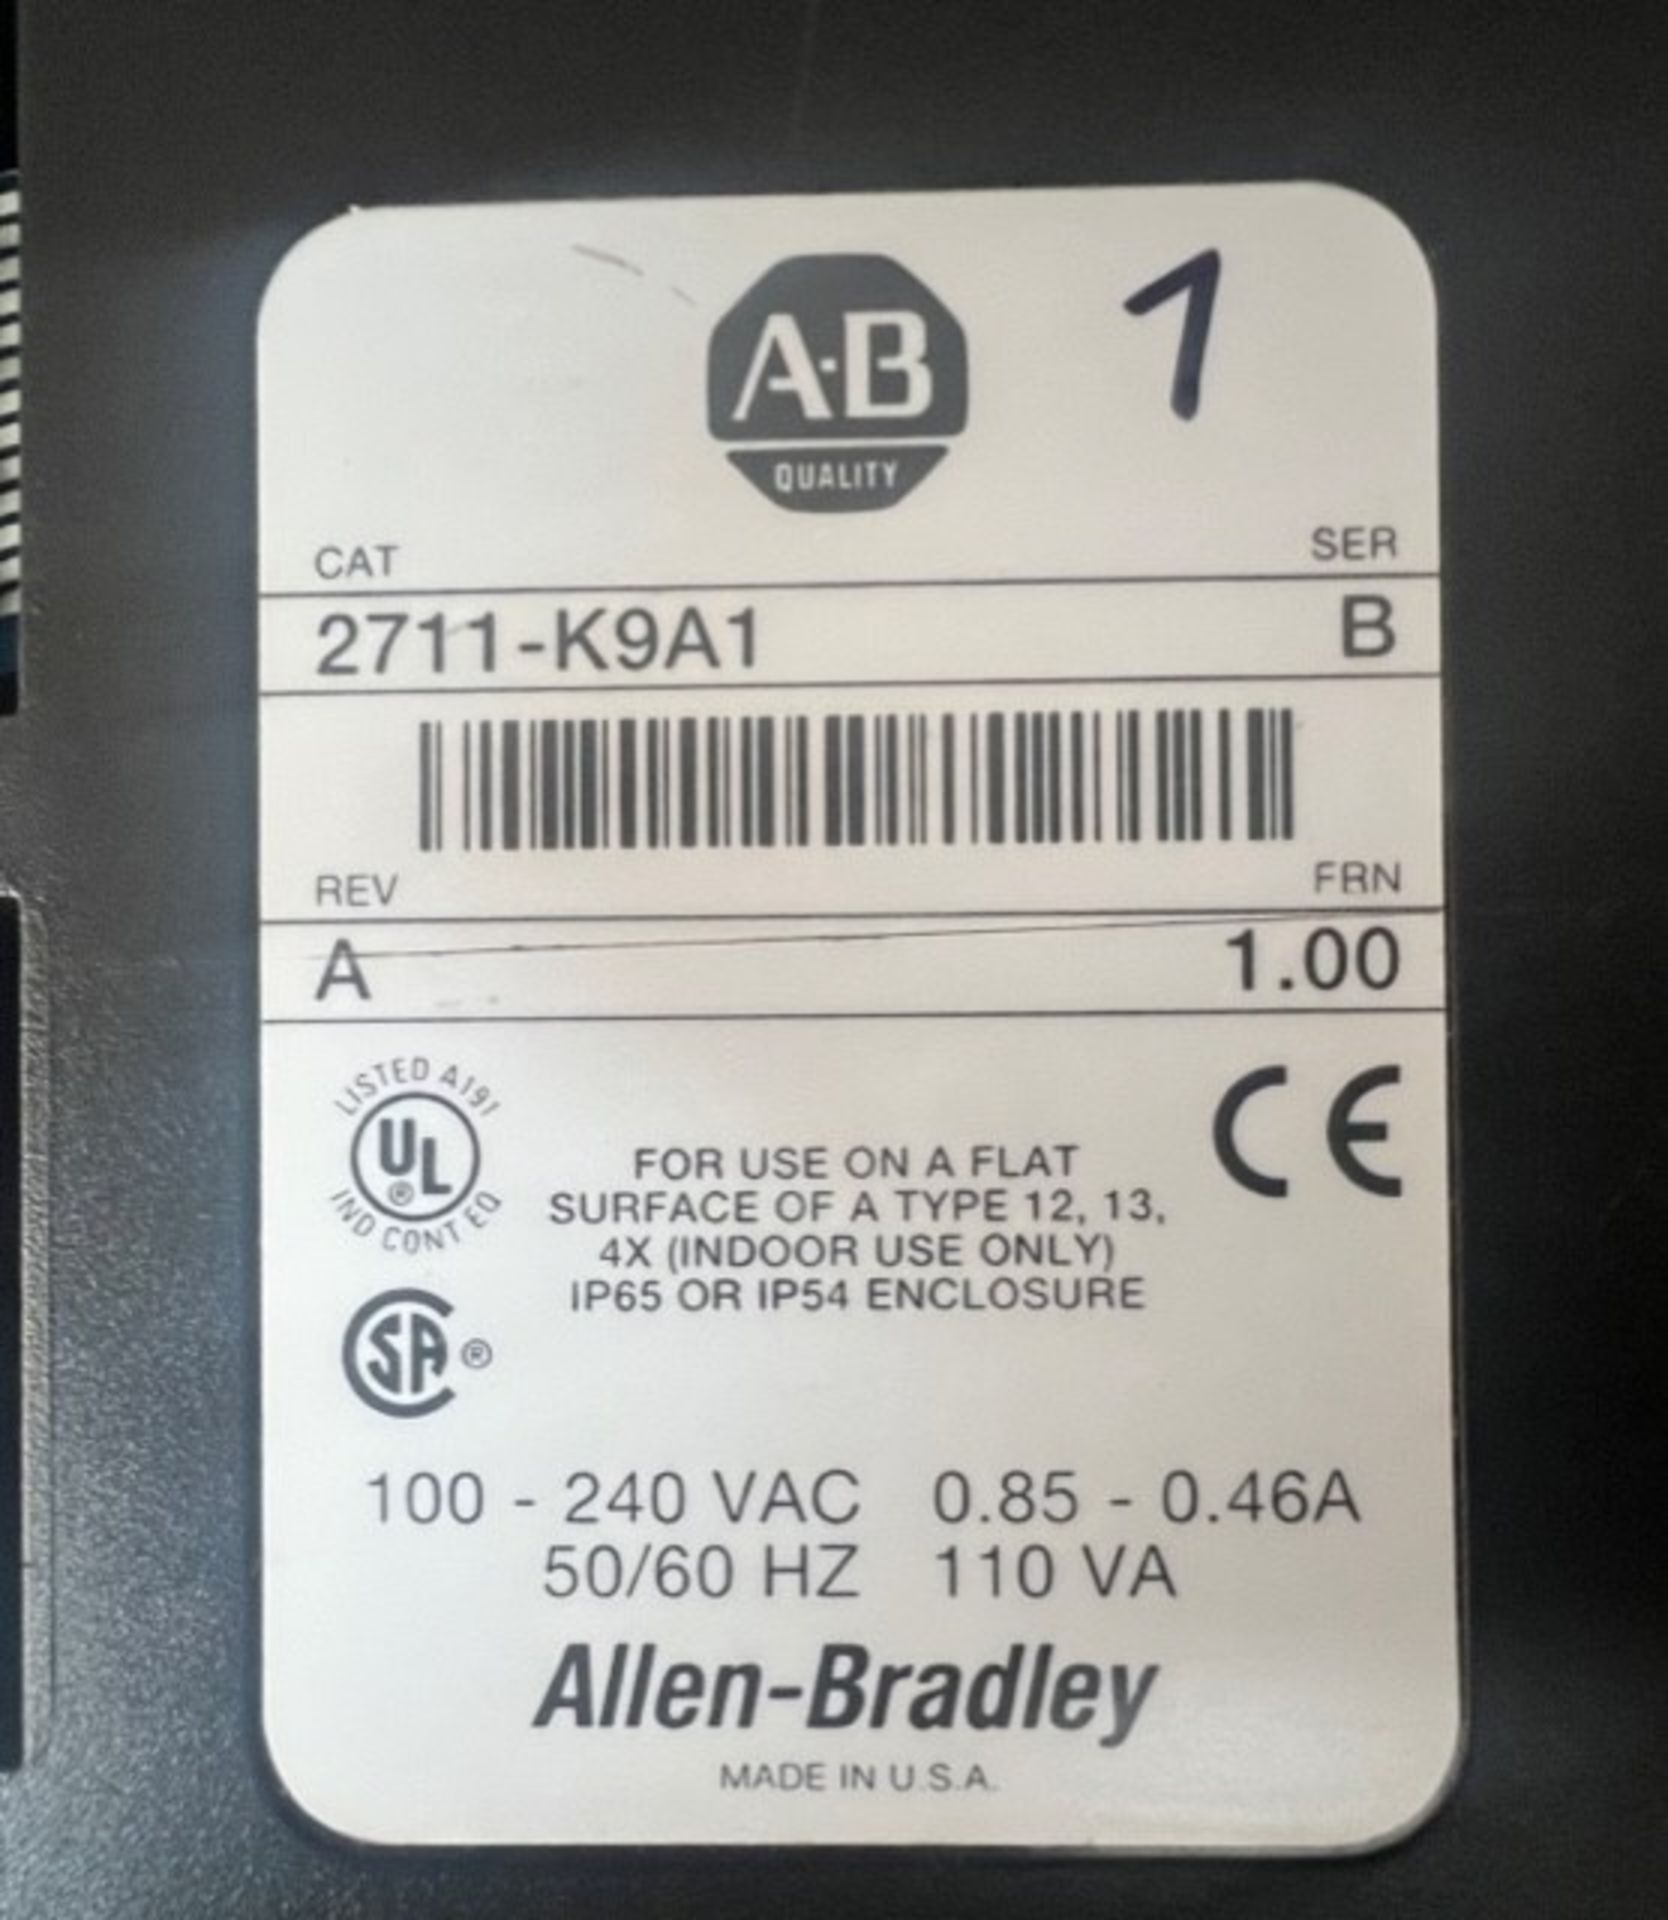 Allen Bradley Panelview 900 Touchpad Display, Cat #2711-K9A1, Ser B (Load Fee $50) (Located - Image 3 of 3